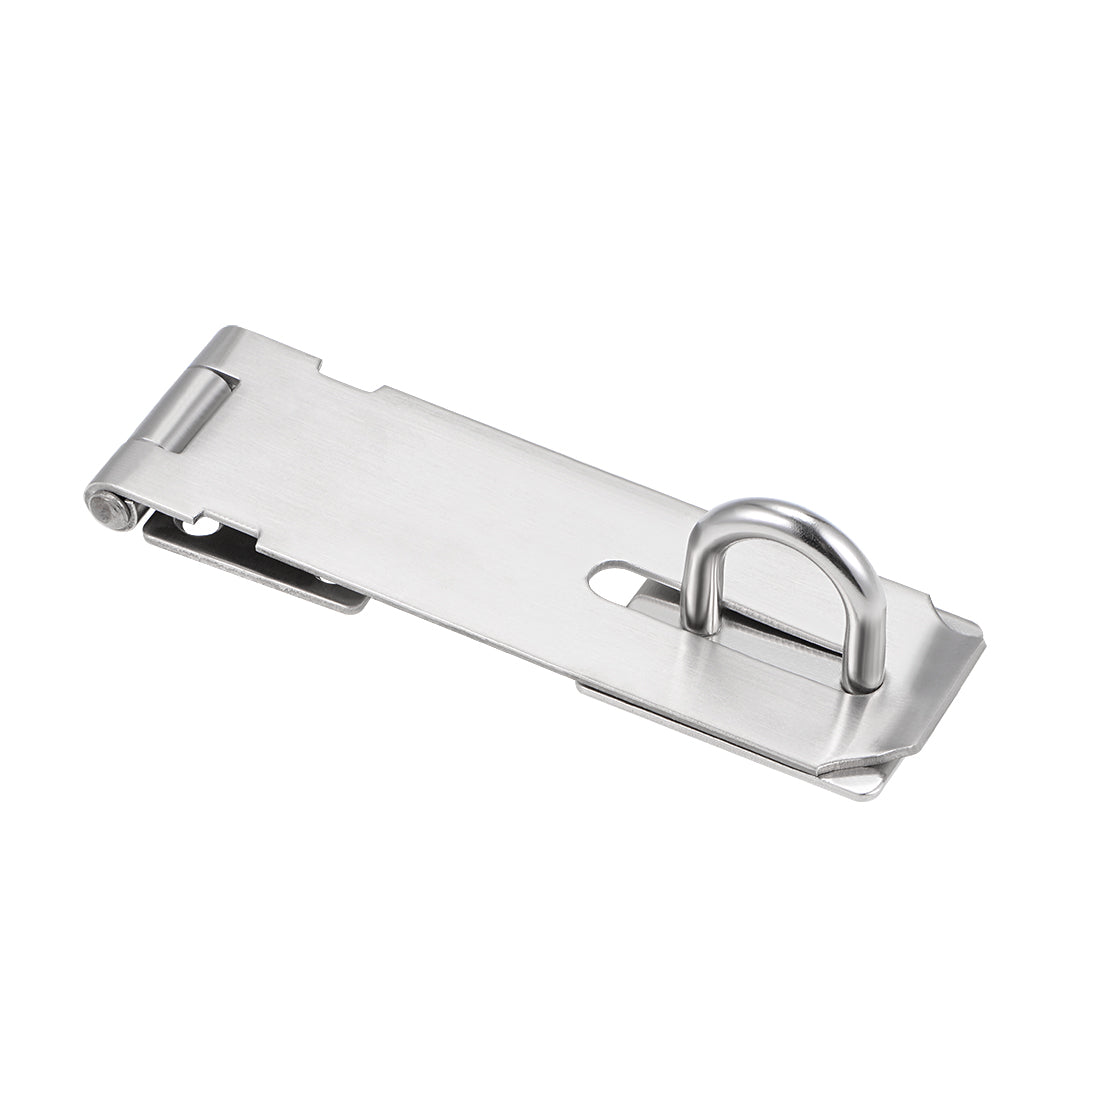 uxcell Uxcell Padlock Hasp Door Clasp Latch Security Safety Bolt Lock Latches Stainless Steel